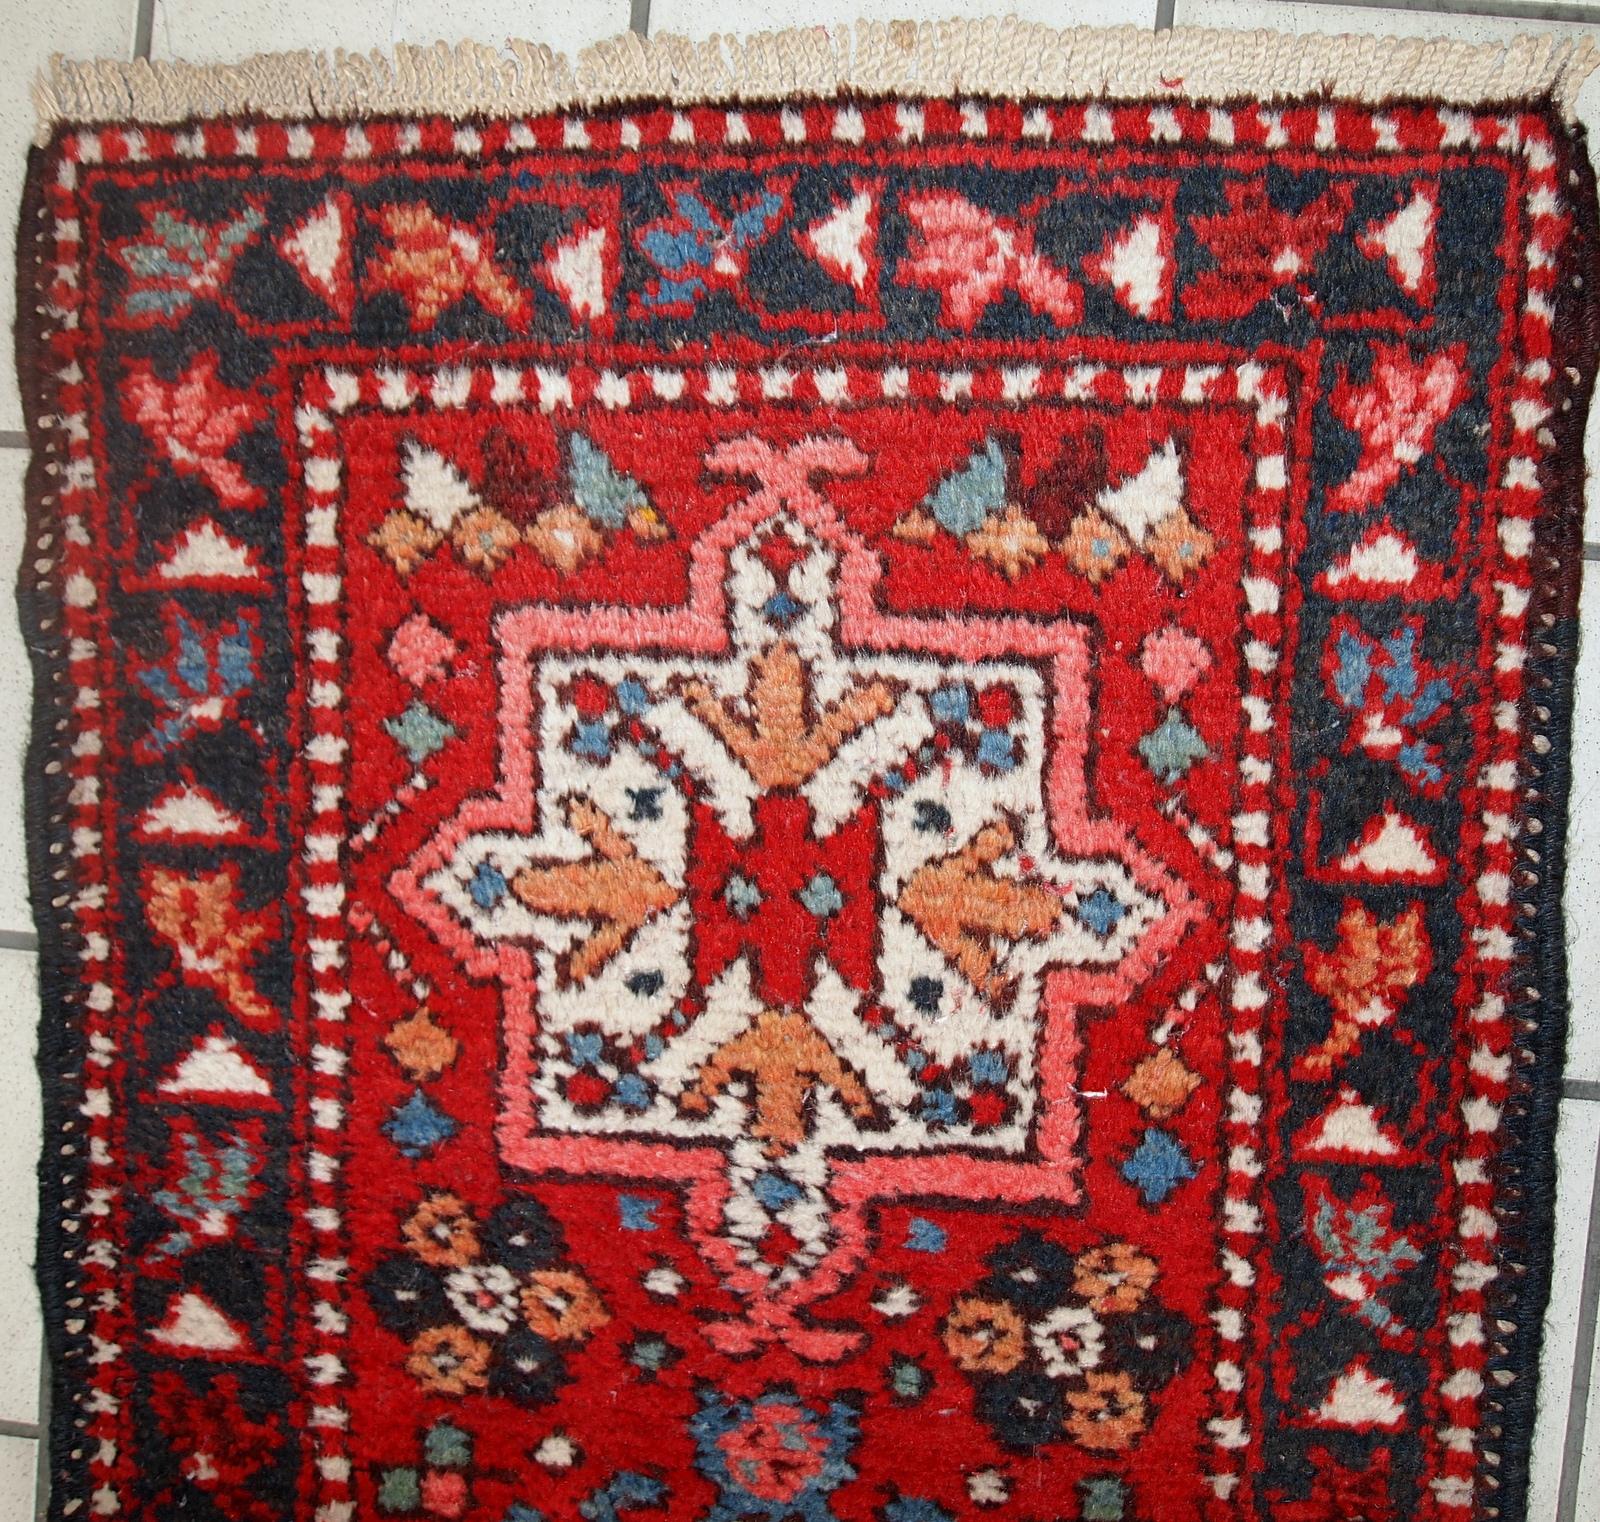 Handmade vintage Karajeh narrow runner in original good condition. The rug is from the middle of the 20th century made in wool.

- Condition: original good,

- circa 1960s,

- Size: 1.9' x 10.2' (57cm x 313cm),

- Material: wool,

-